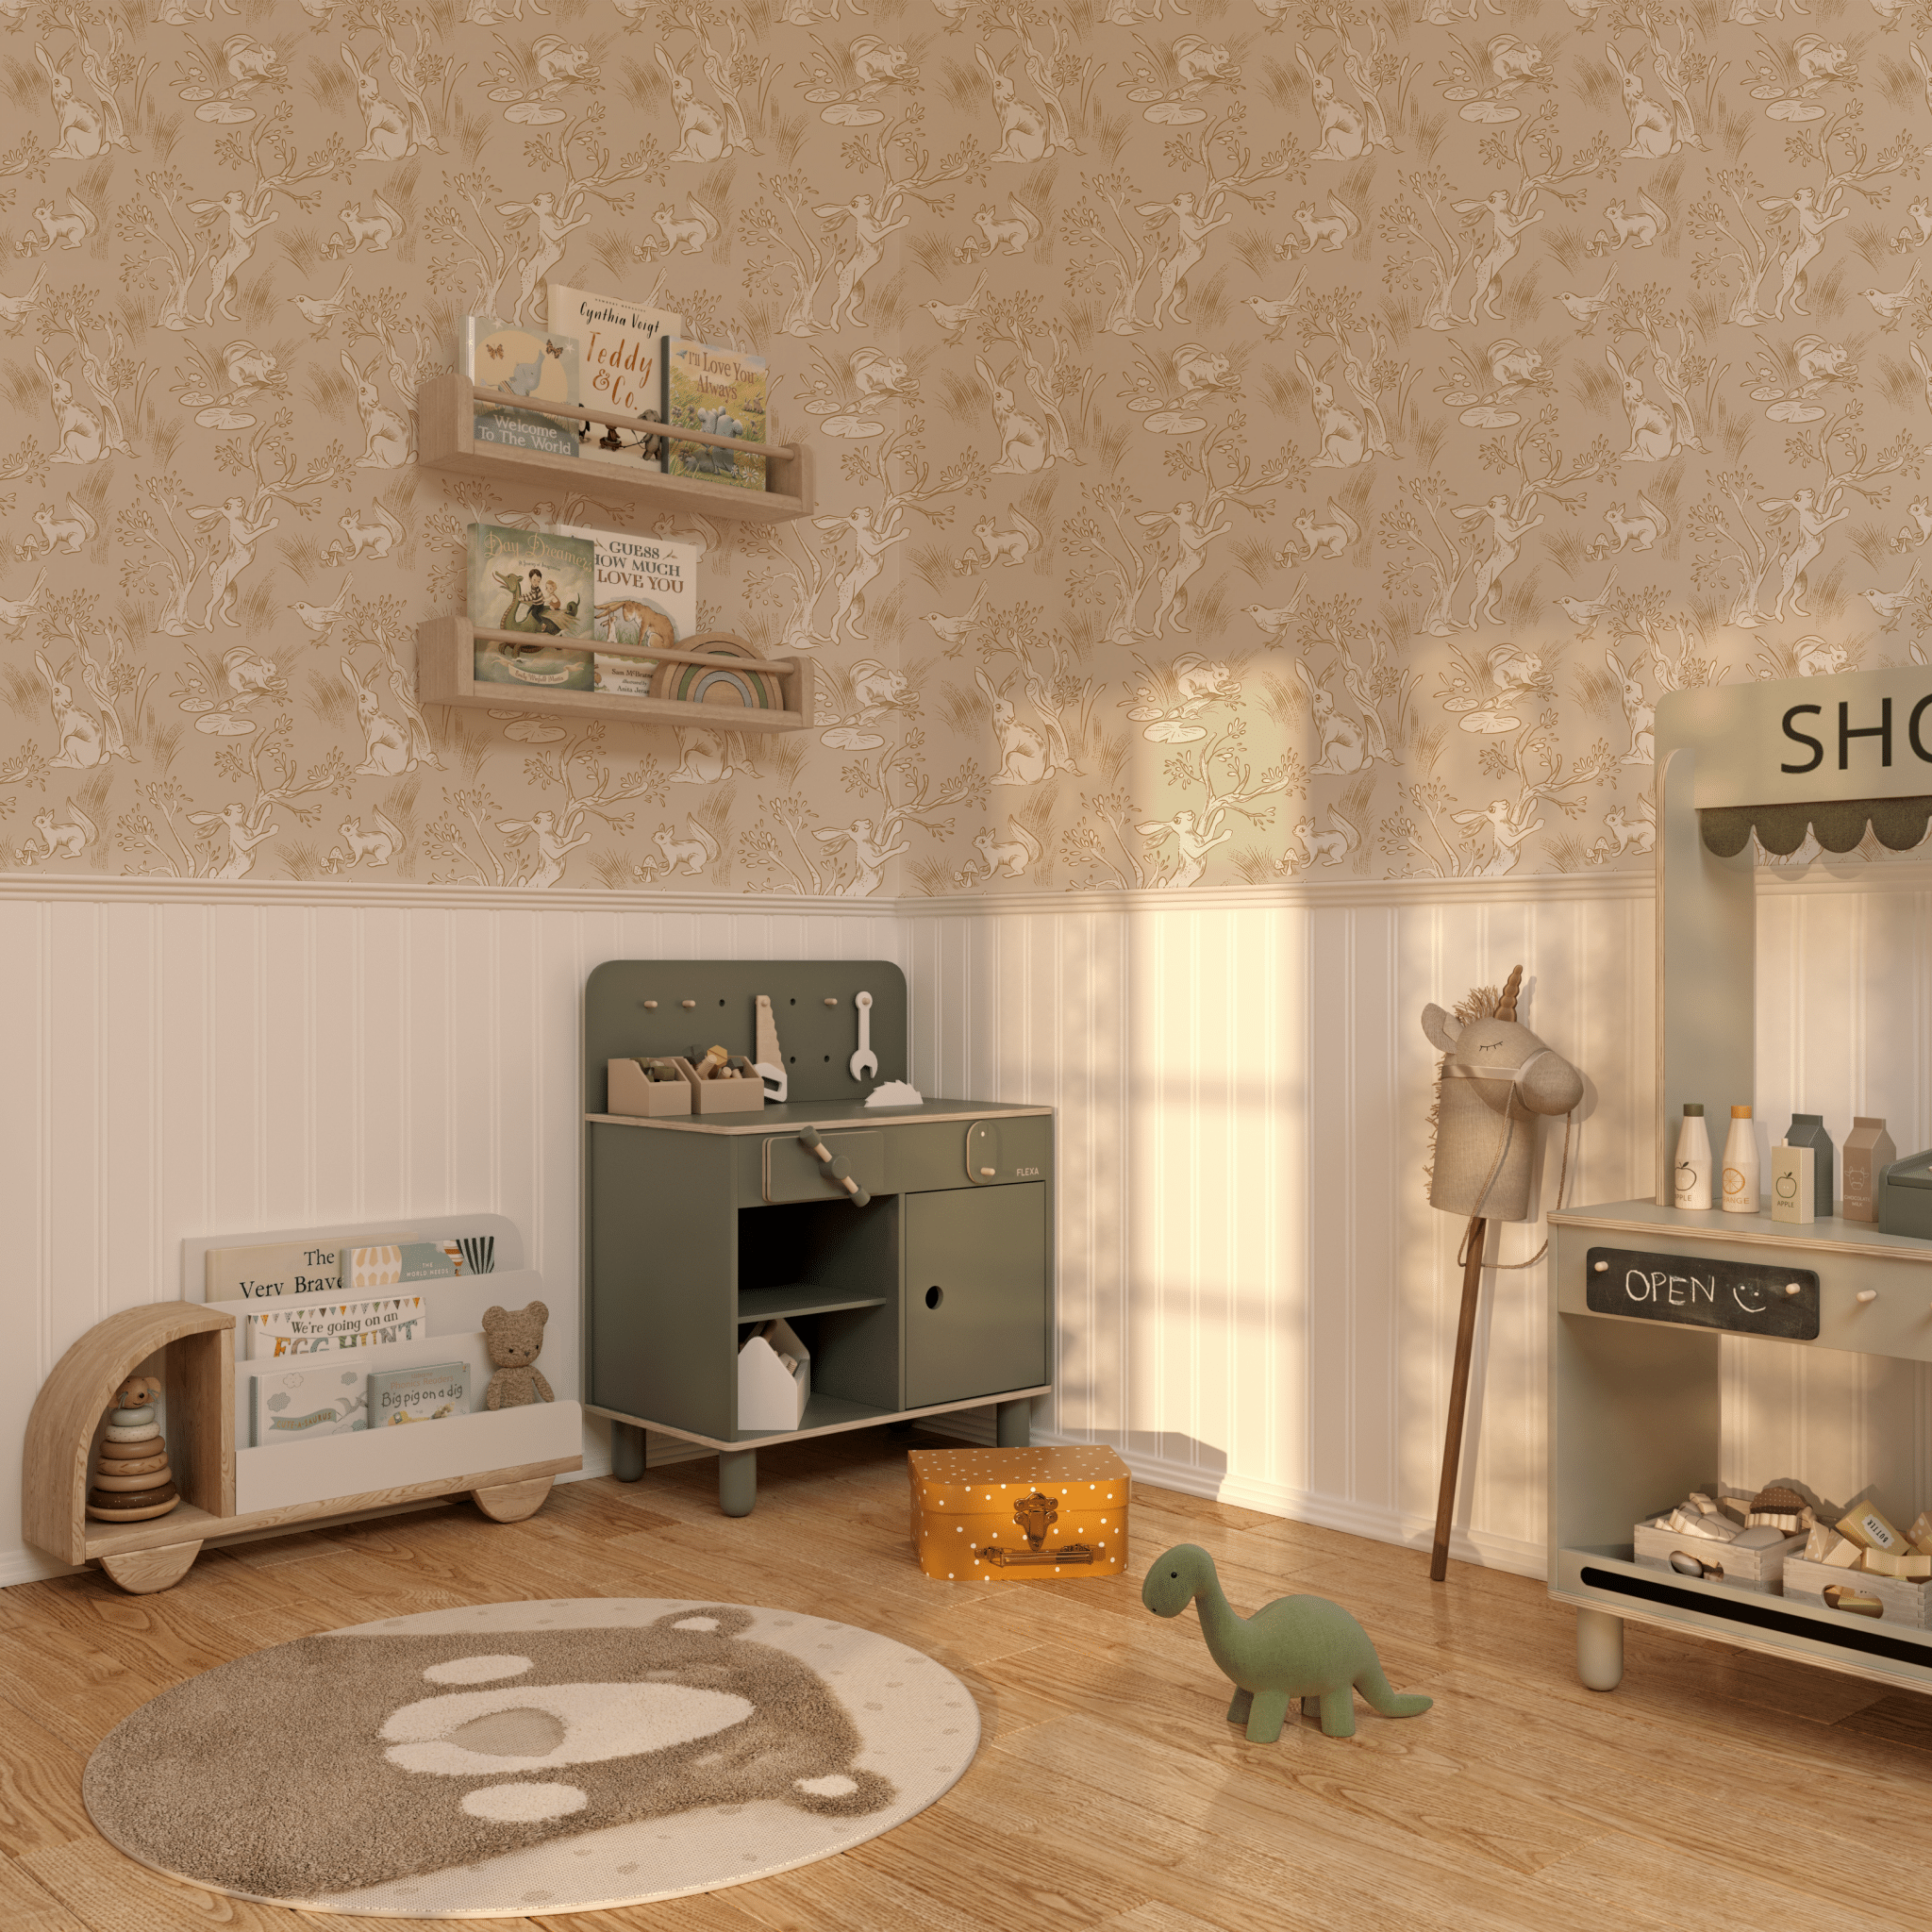 A cozy nursery room with removable beige wallpaper featuring playful woodland animals, wooden toys, and a whimsical shop playset